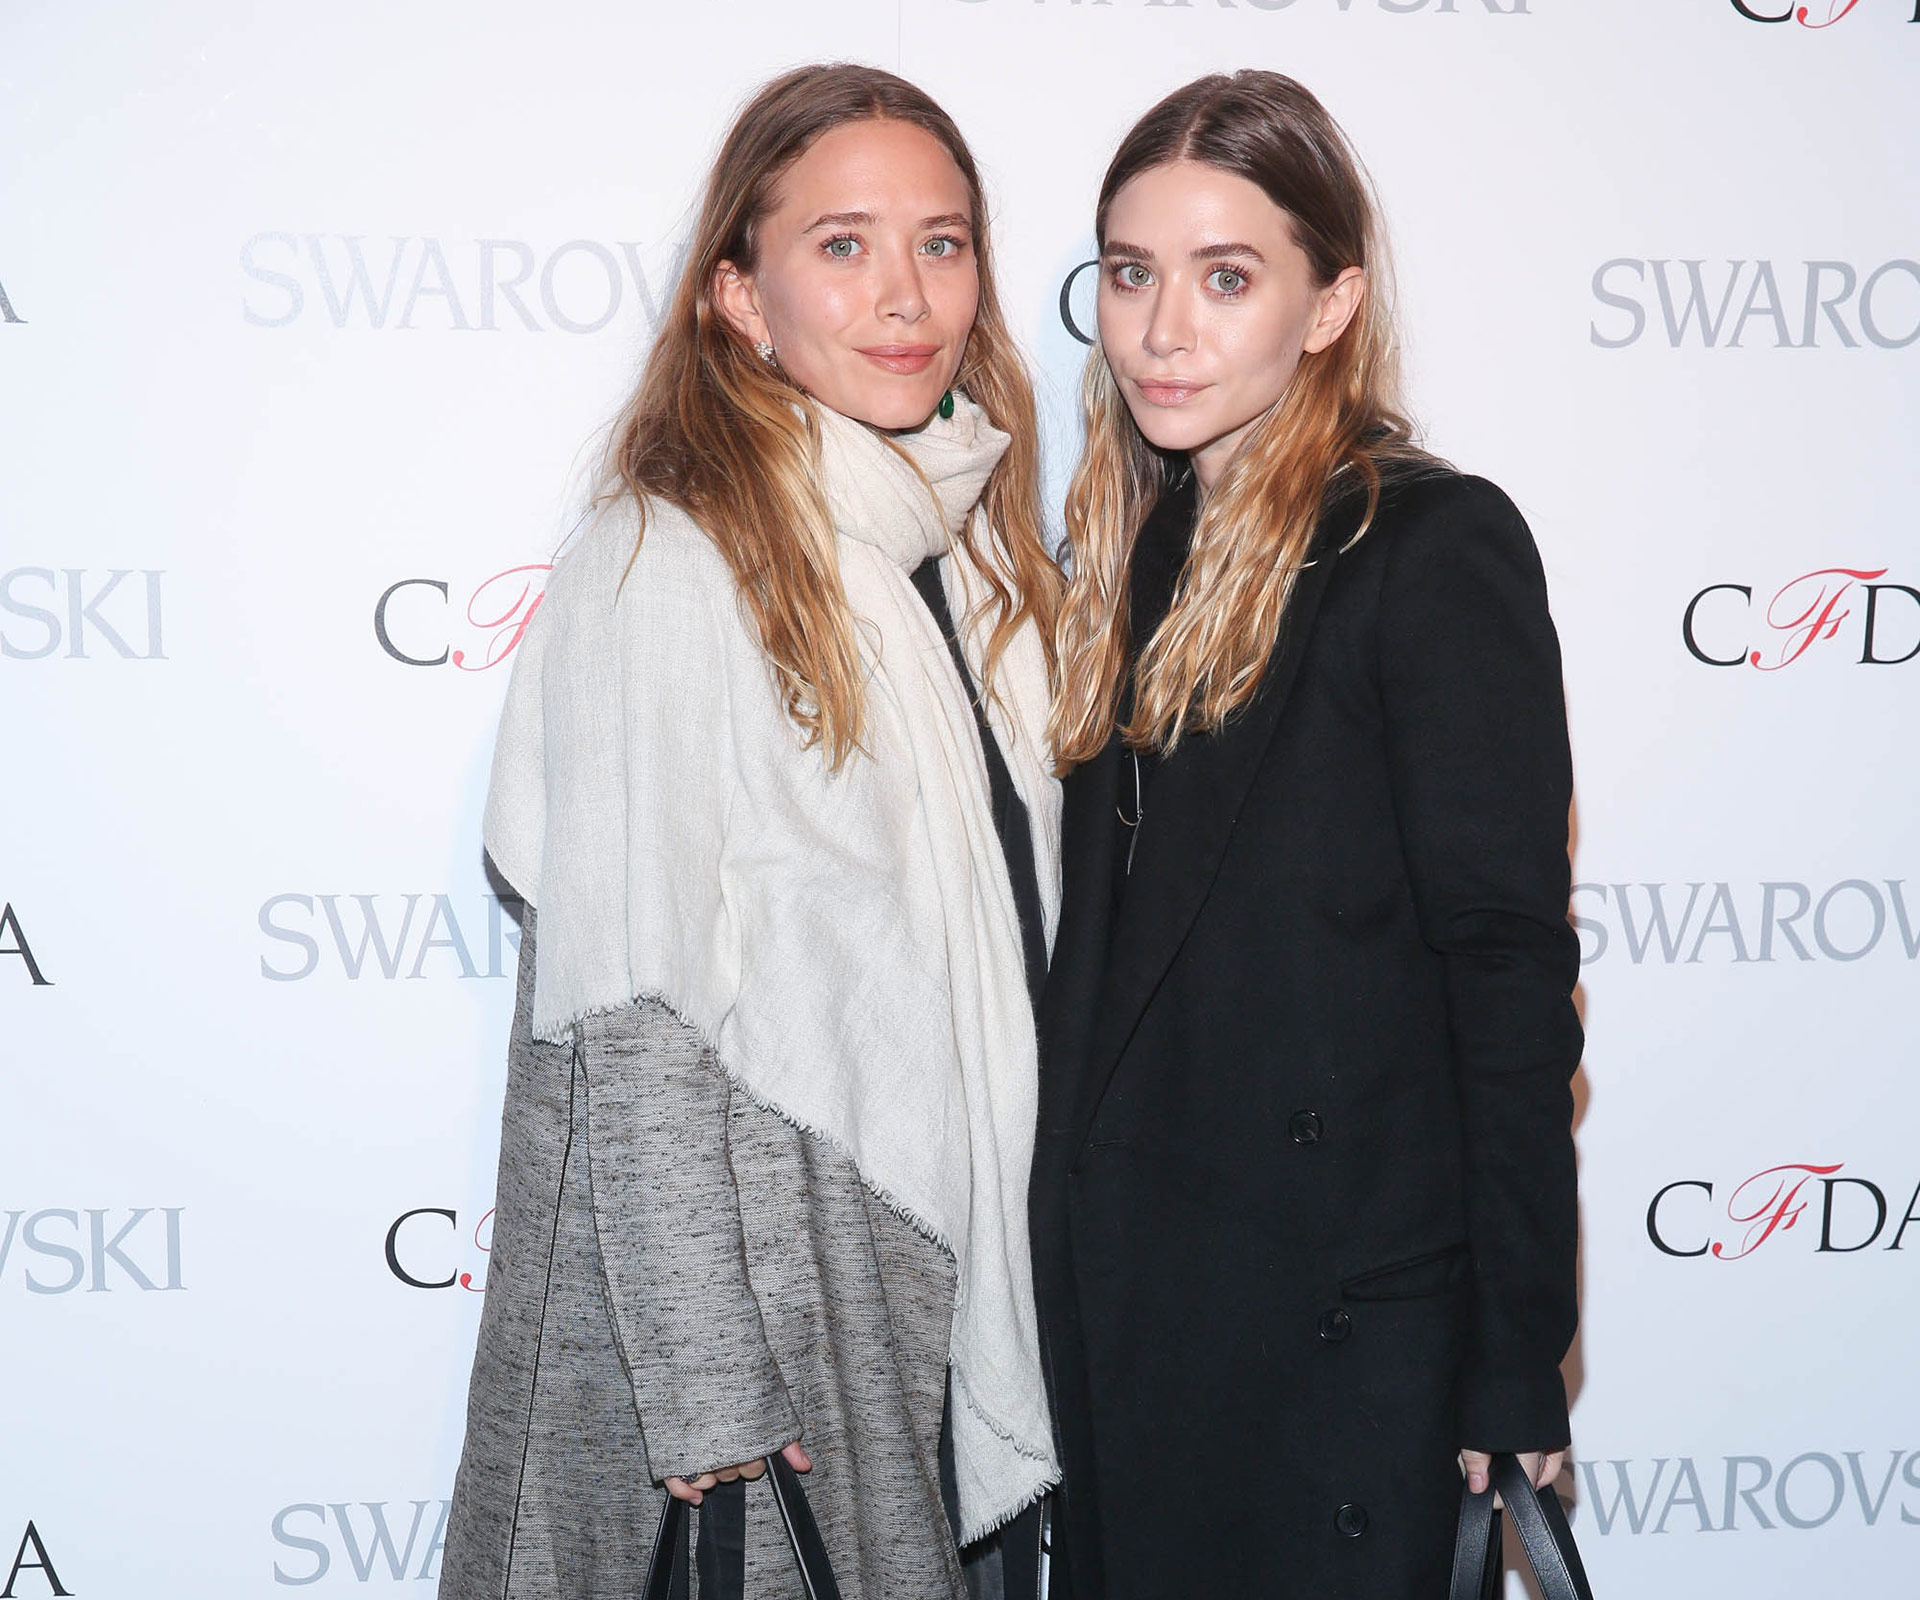 Mary-Kate and Ashley Olsen are keen to star in the Full House reunion